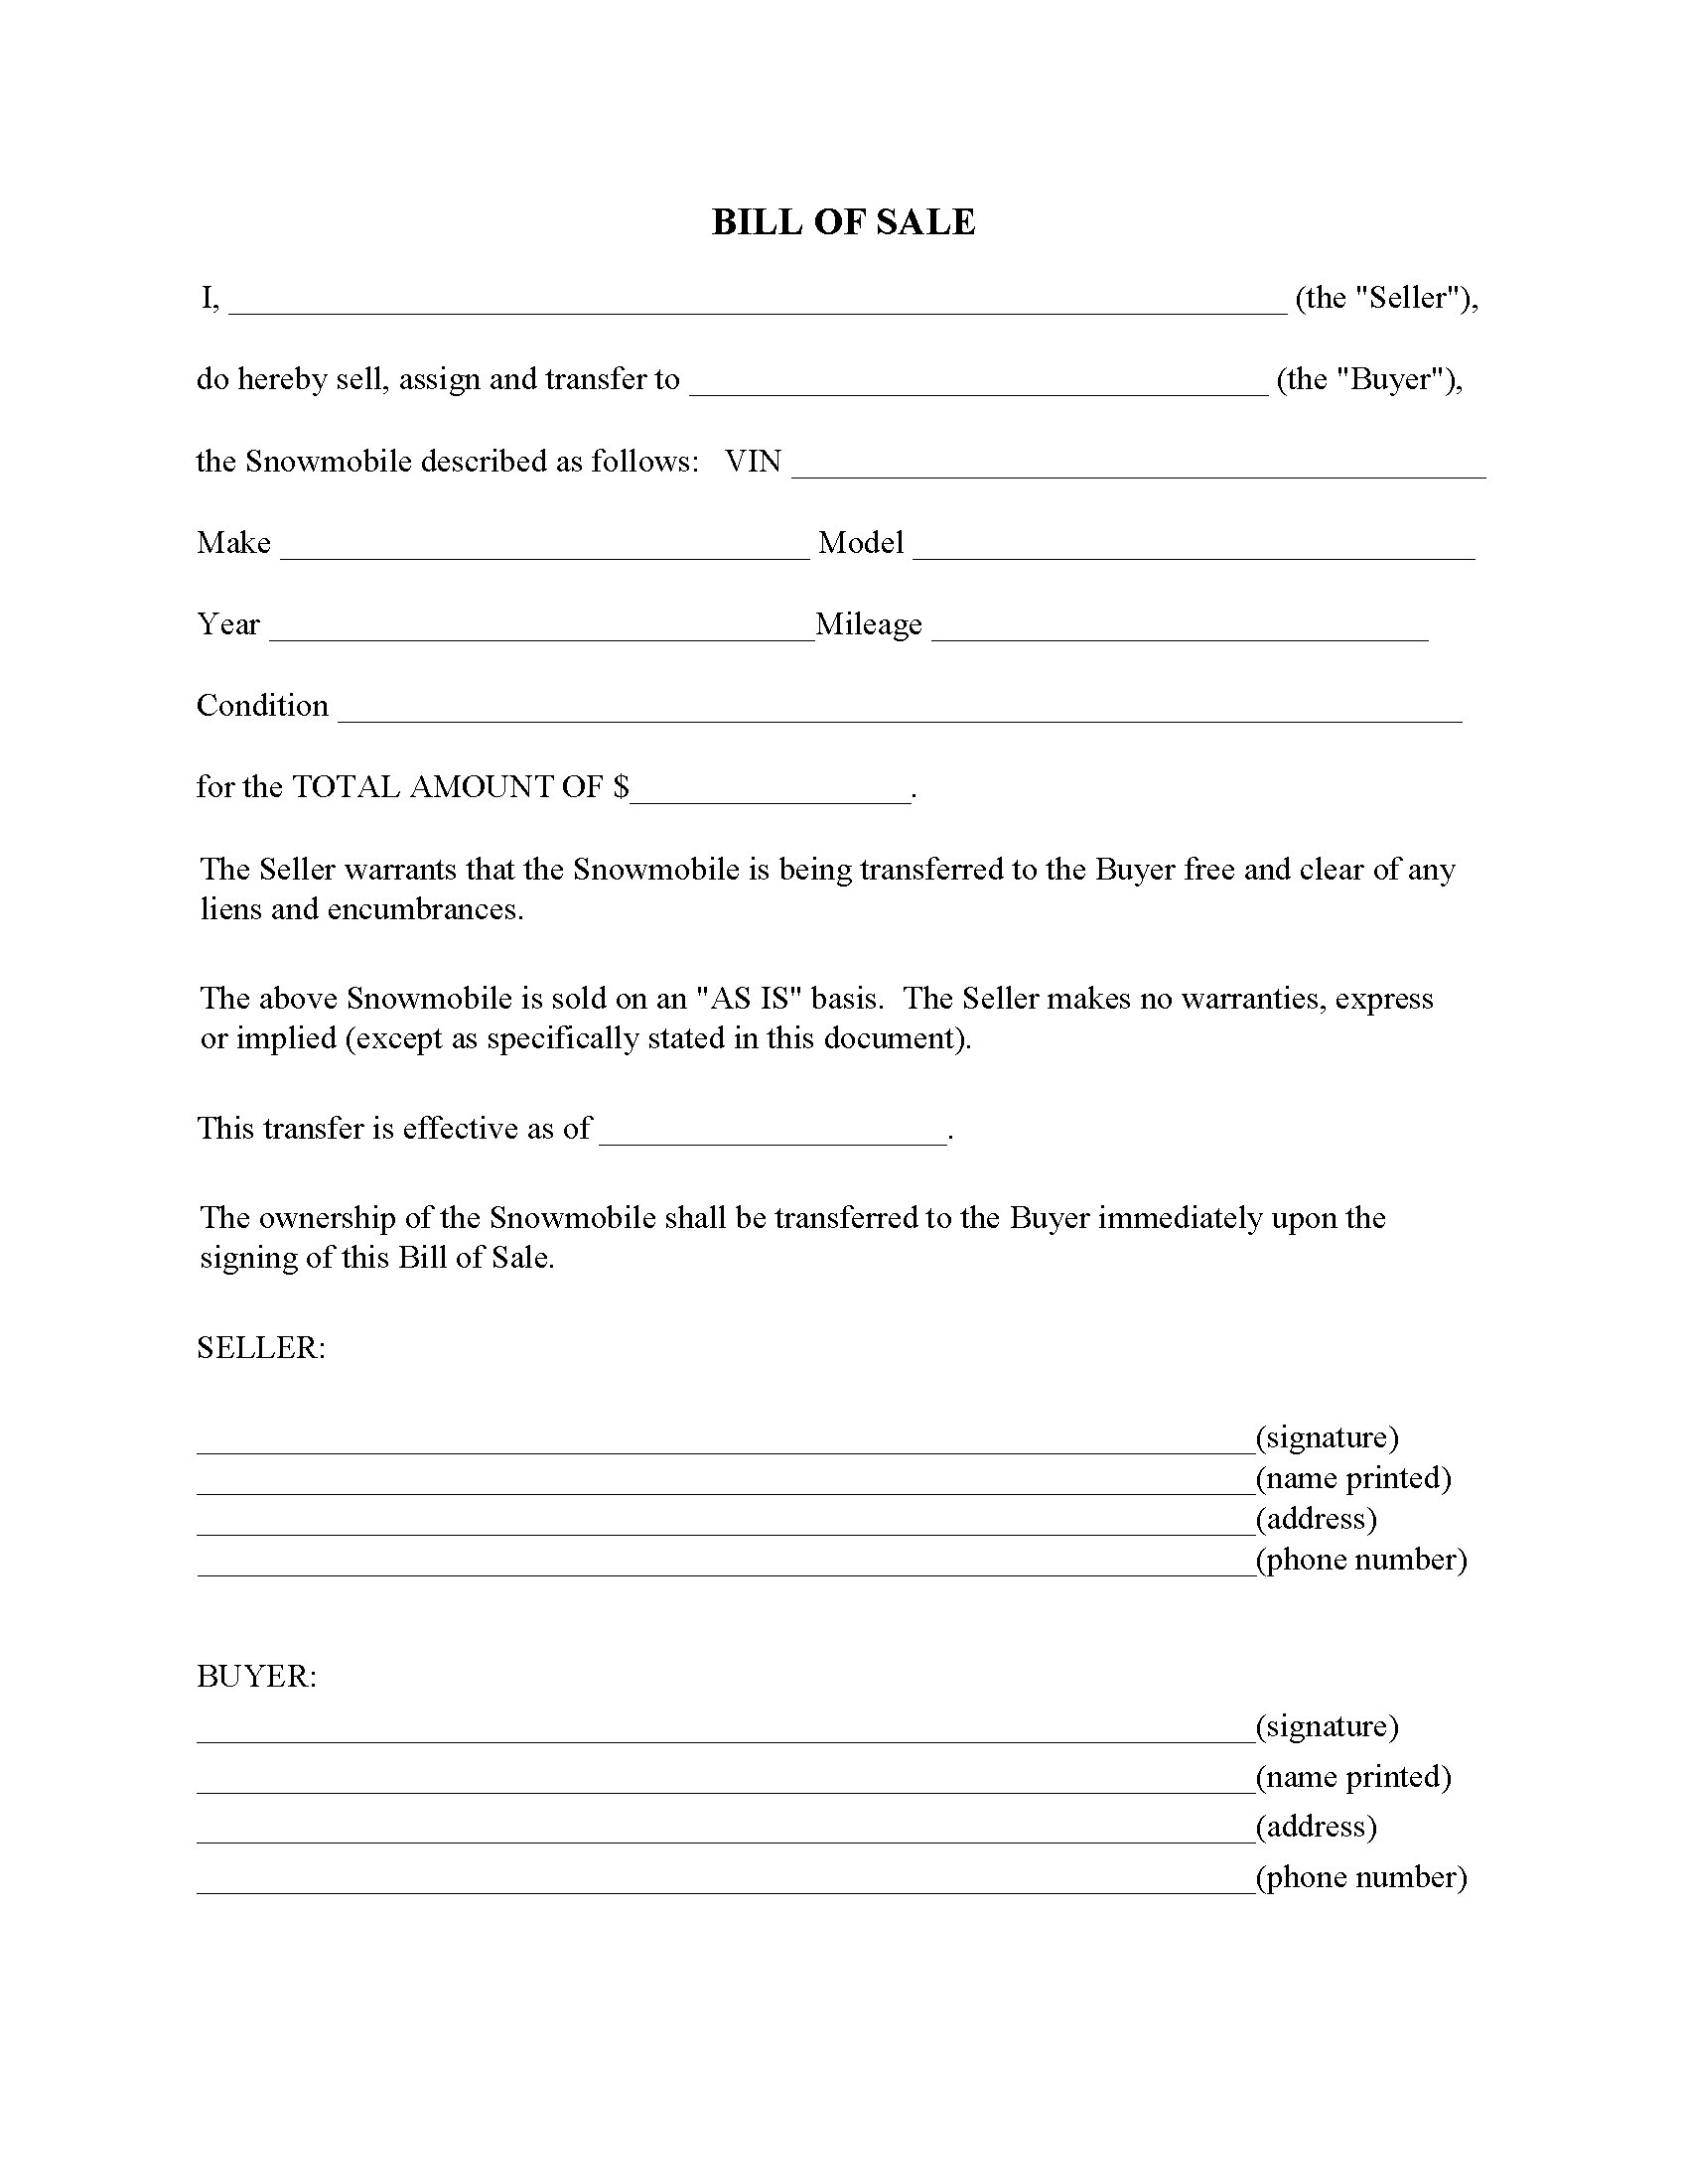 Rhode Island Snowmobile Bill of Sale Form - Word - Free Printable With Regard To Bill Of Sale Template Ri